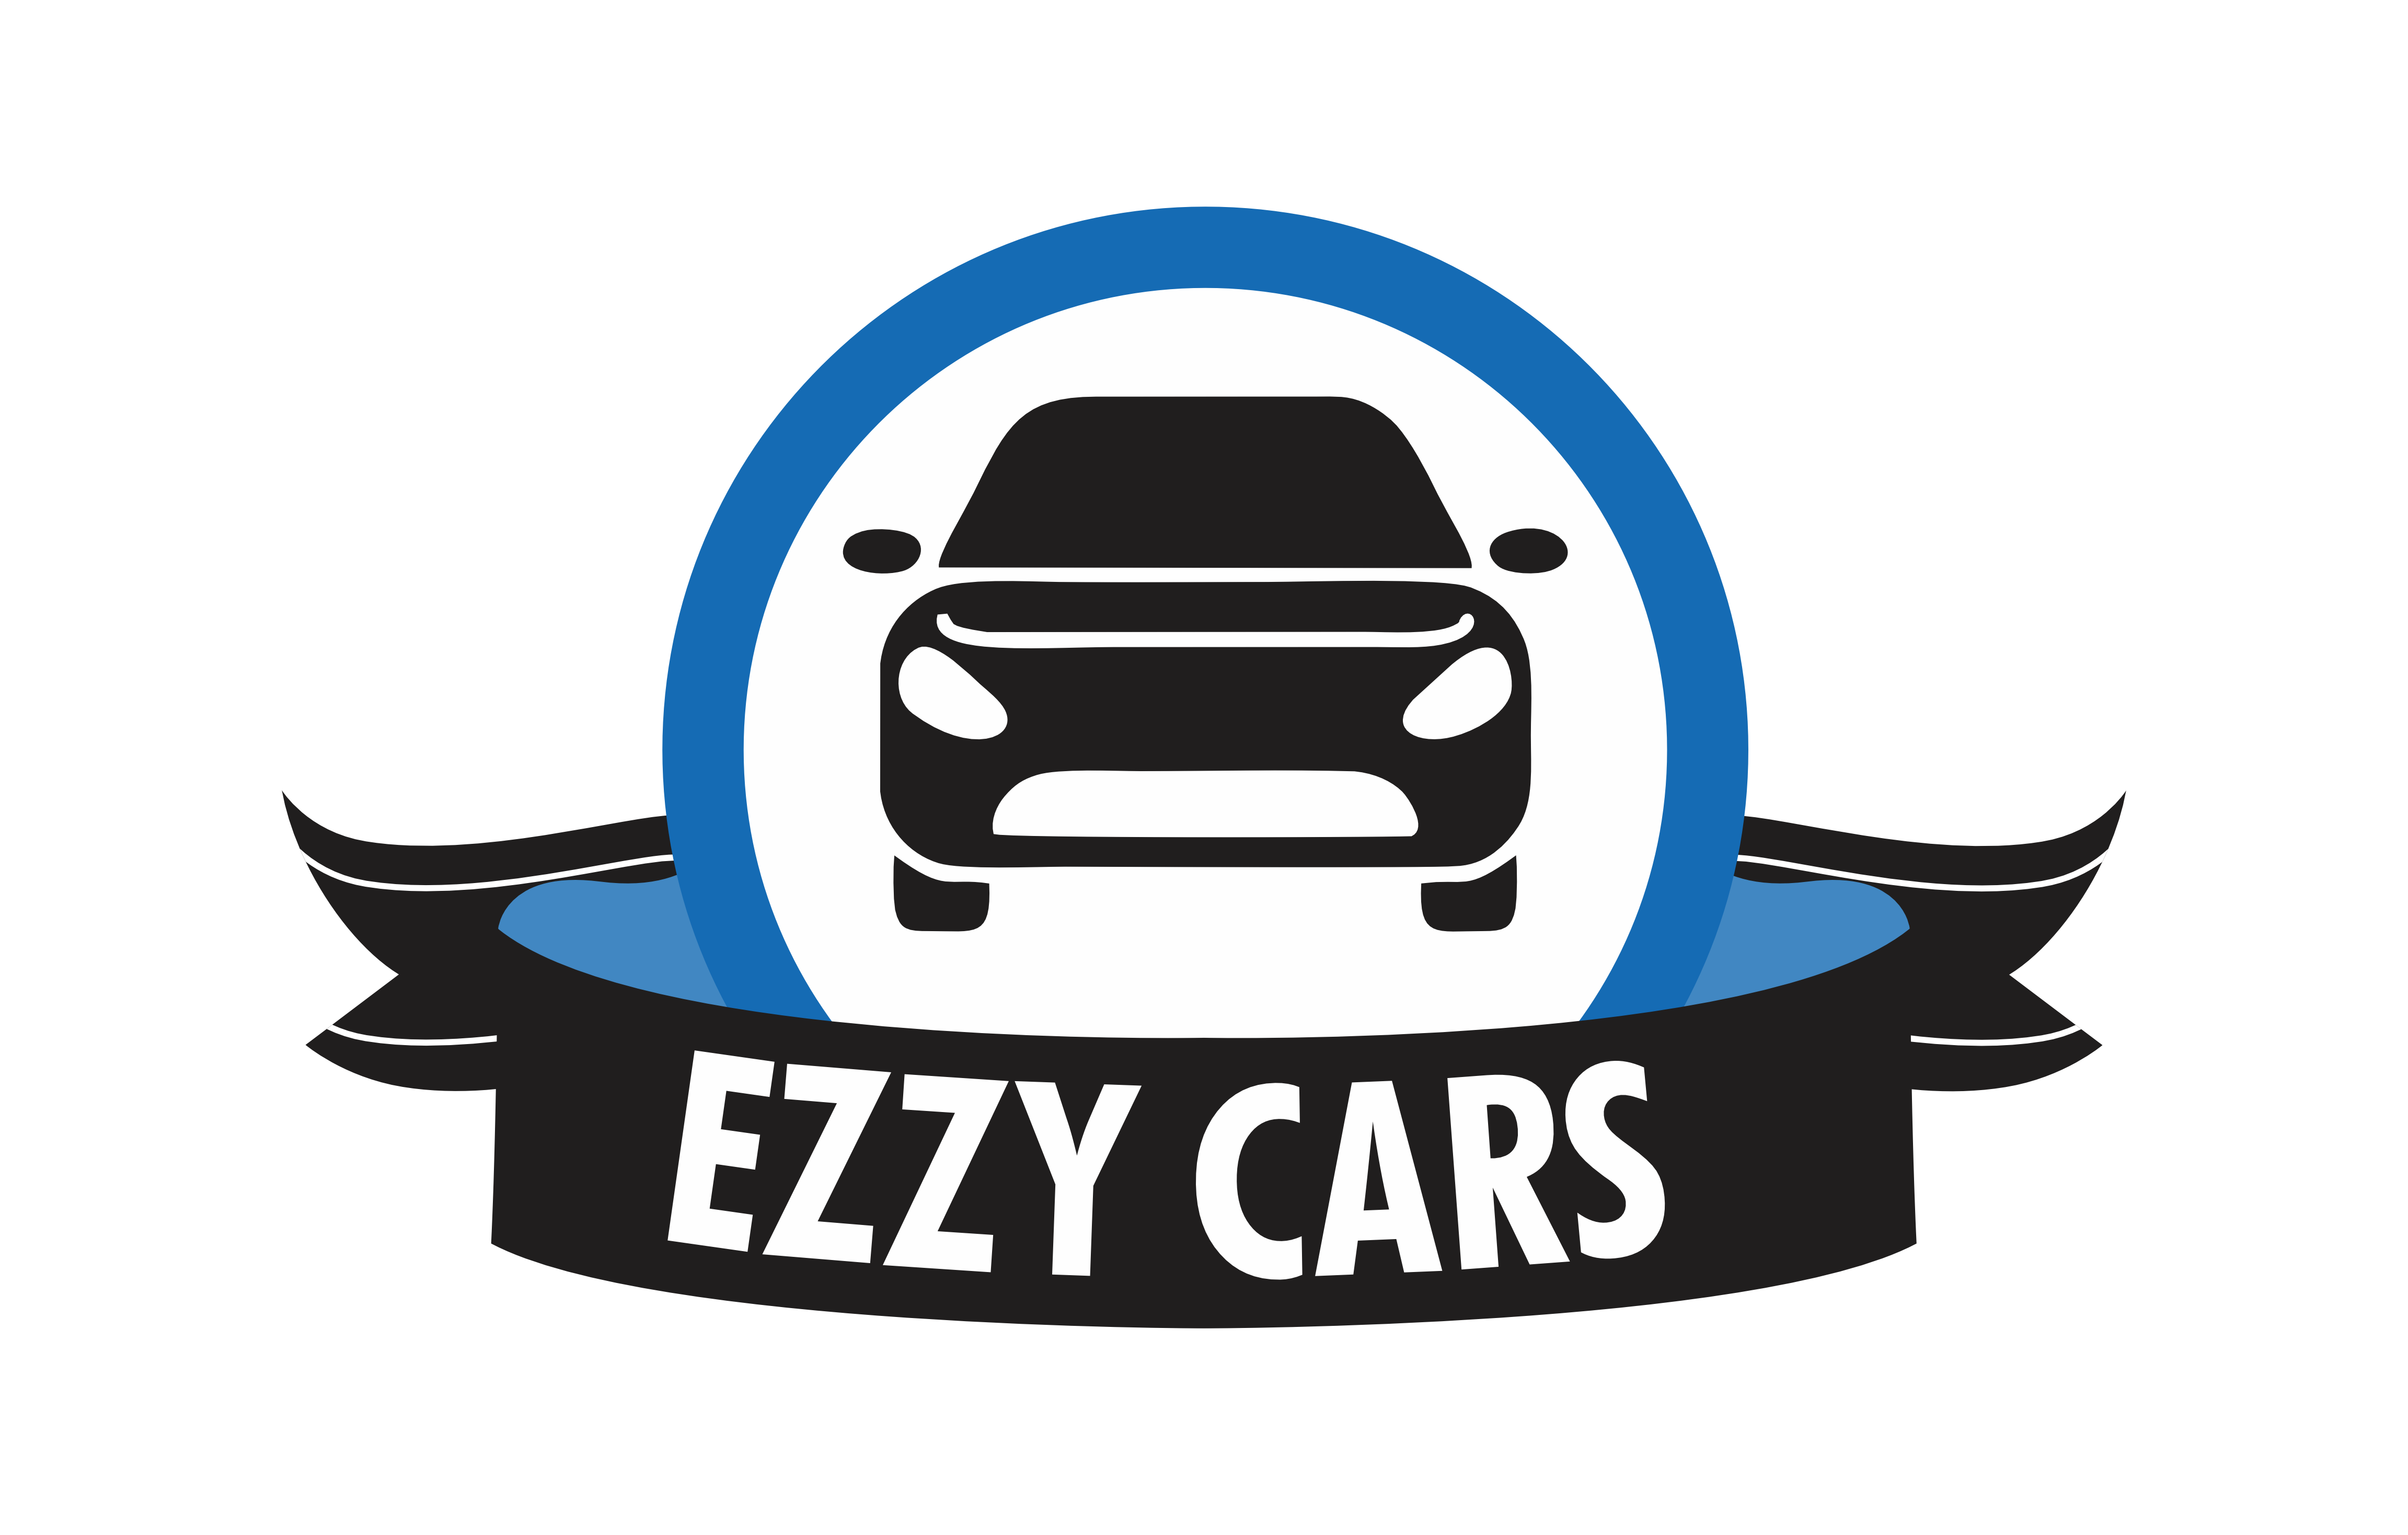 Ezzy cars Birmingham Airport taxis And Transfers